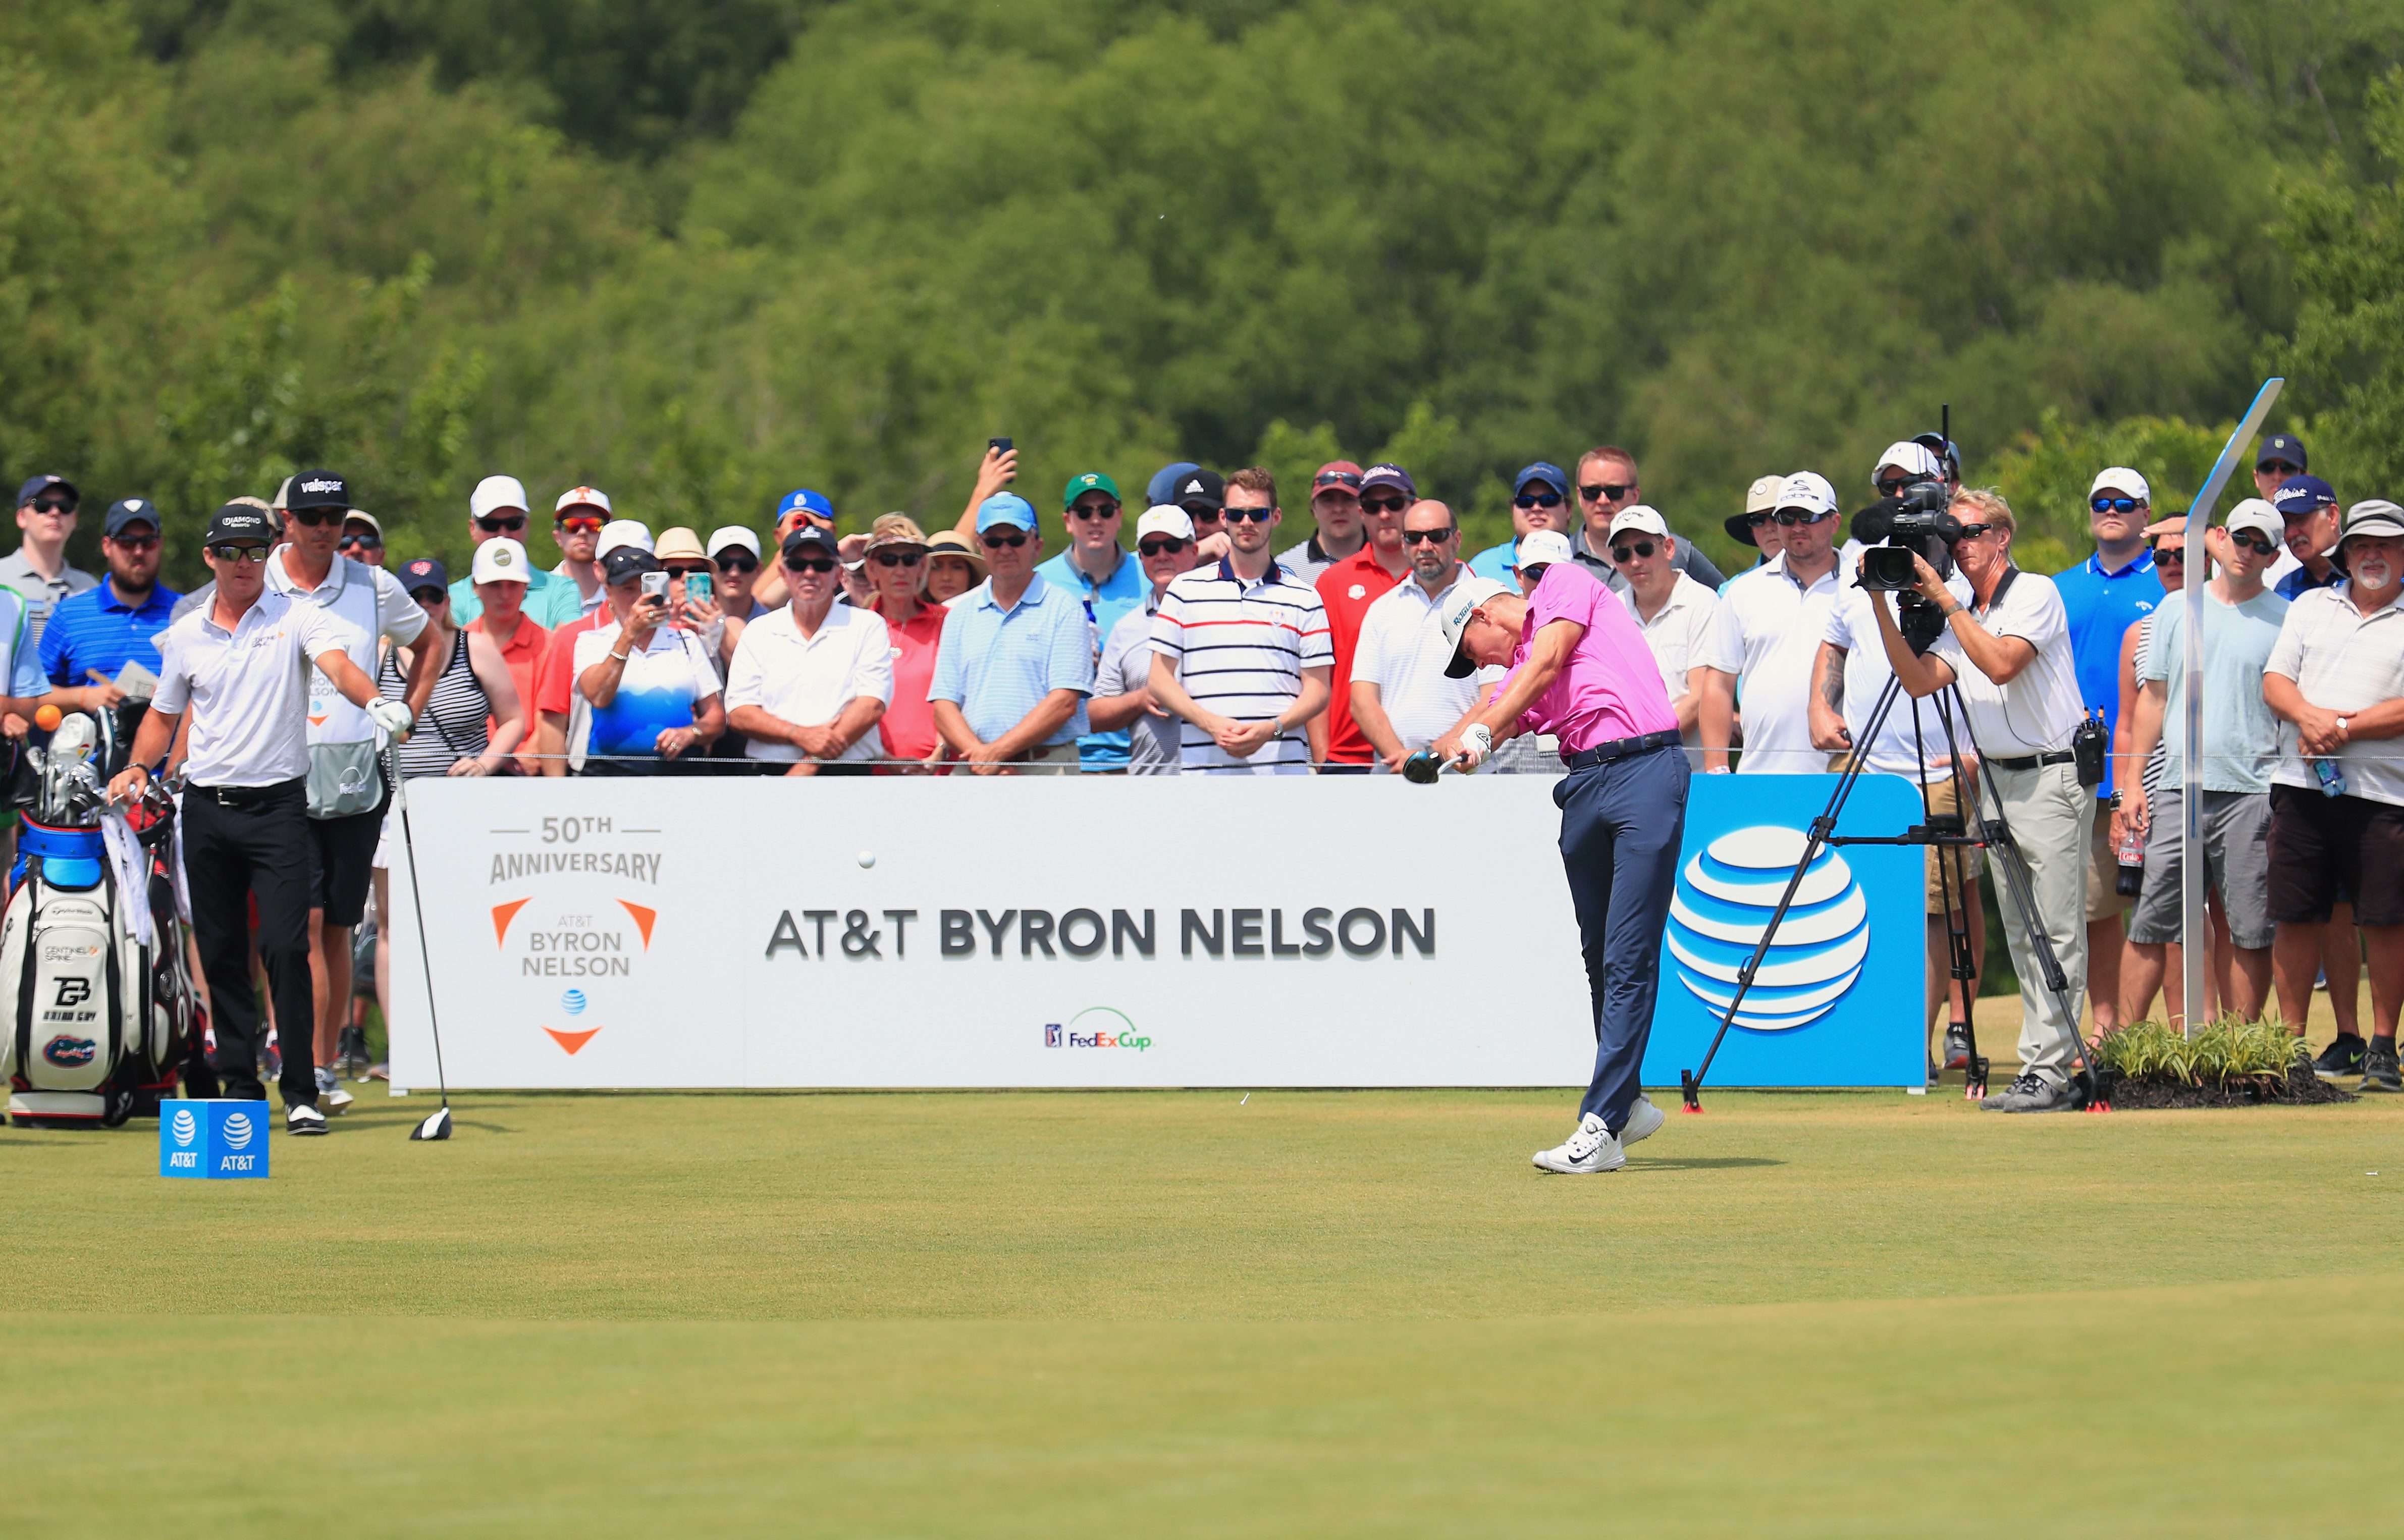 AT&T Byron Nelson Purse How Much Prize Money Does Winner Make?